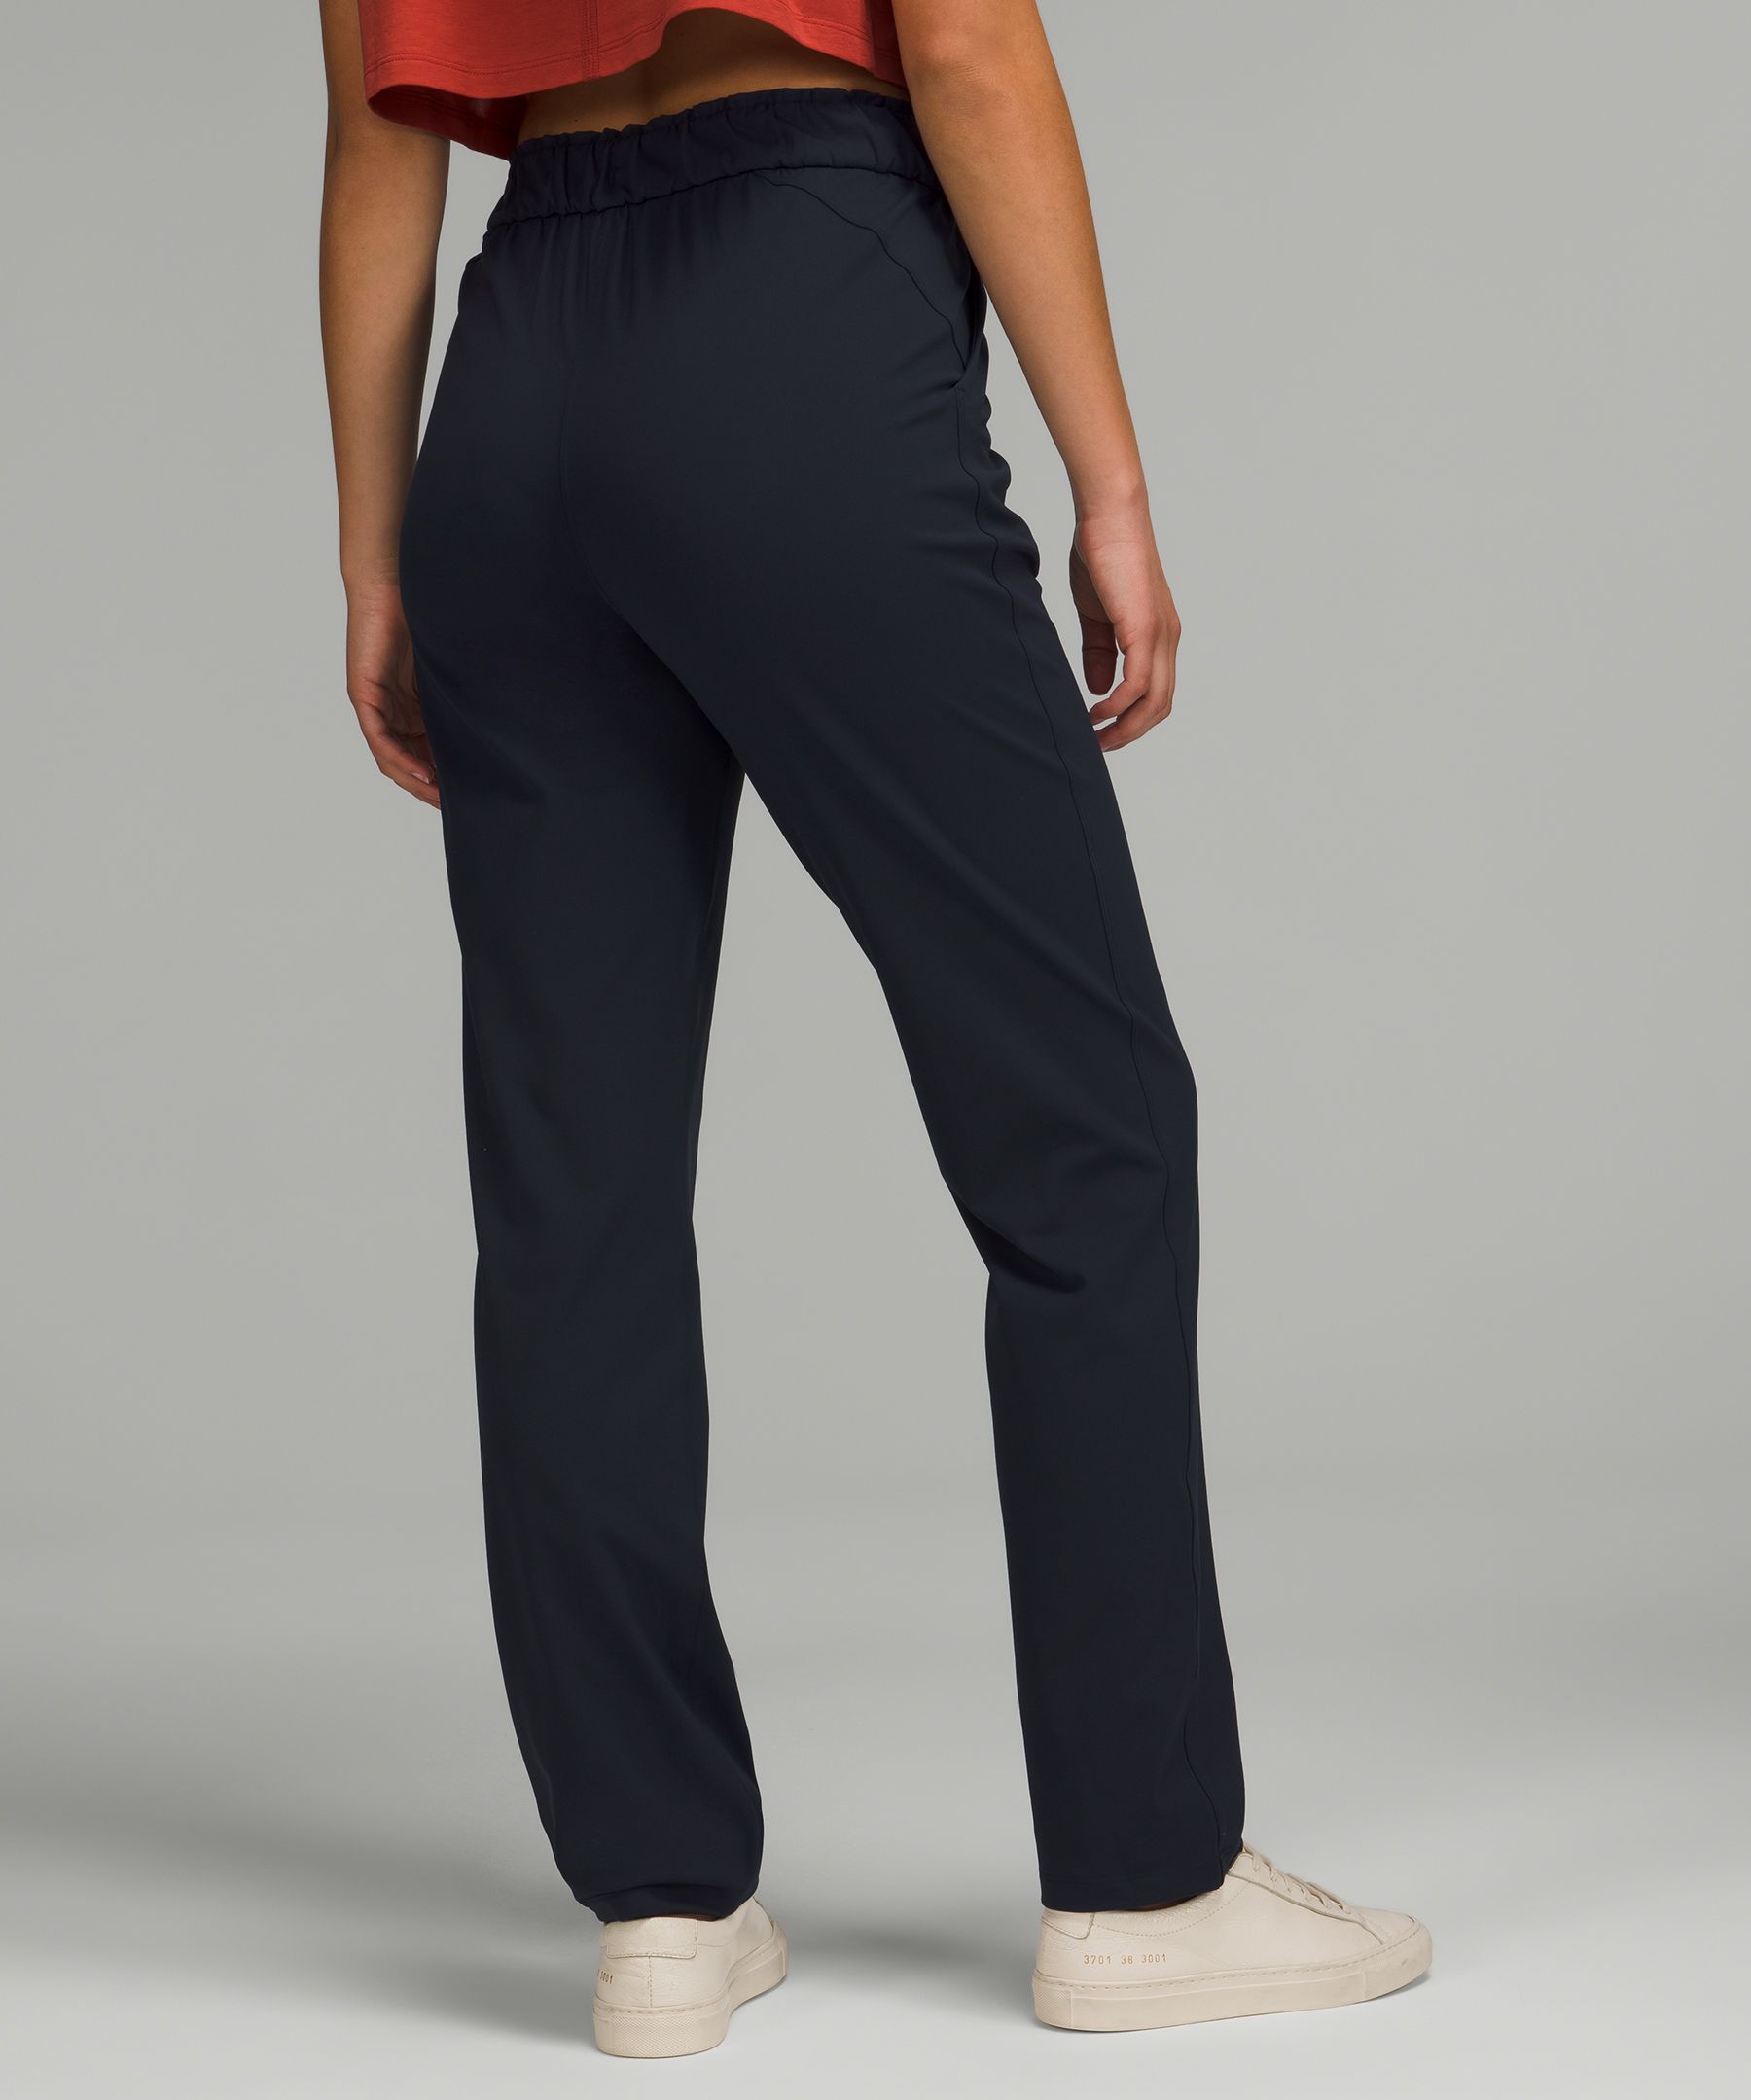 Stretch Luxtreme High-Rise Pant *Full Length, Women's Pants